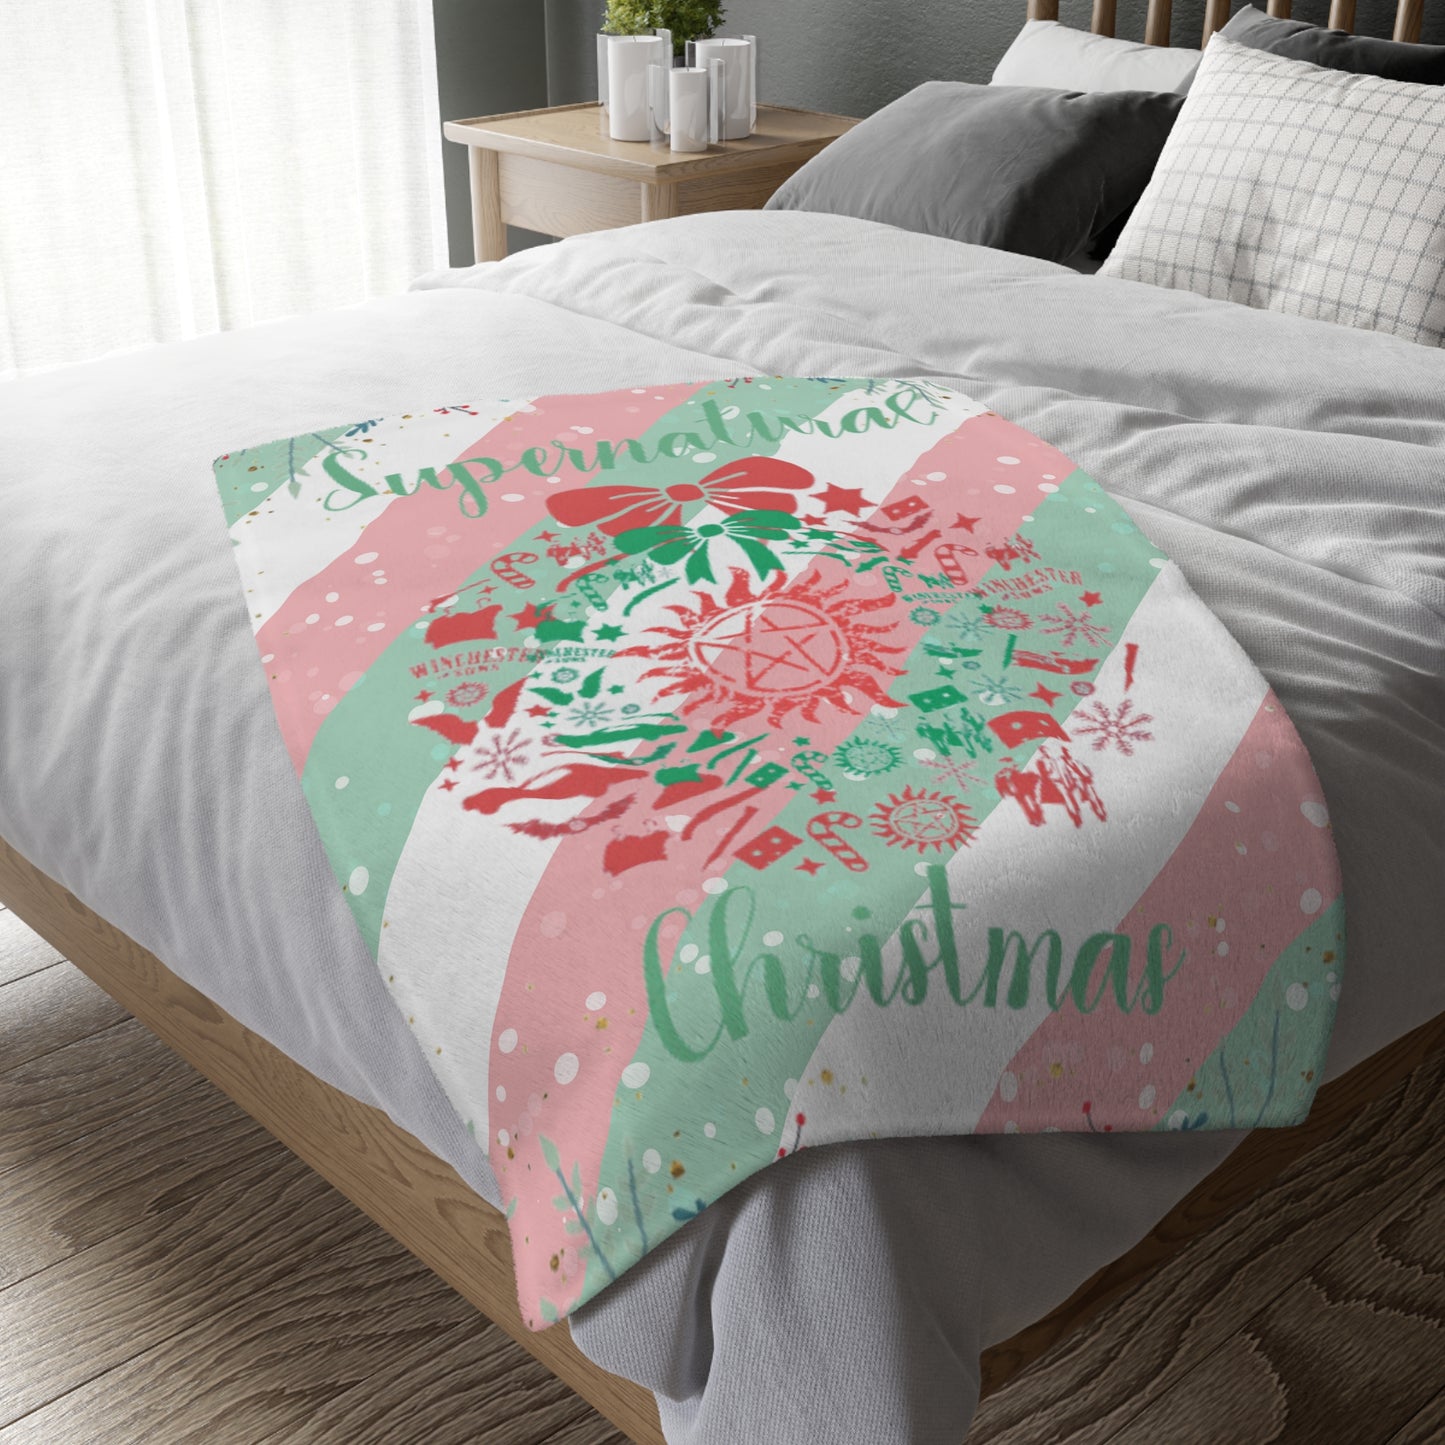 Supernatural Wreath Blanket (Two-sided print)